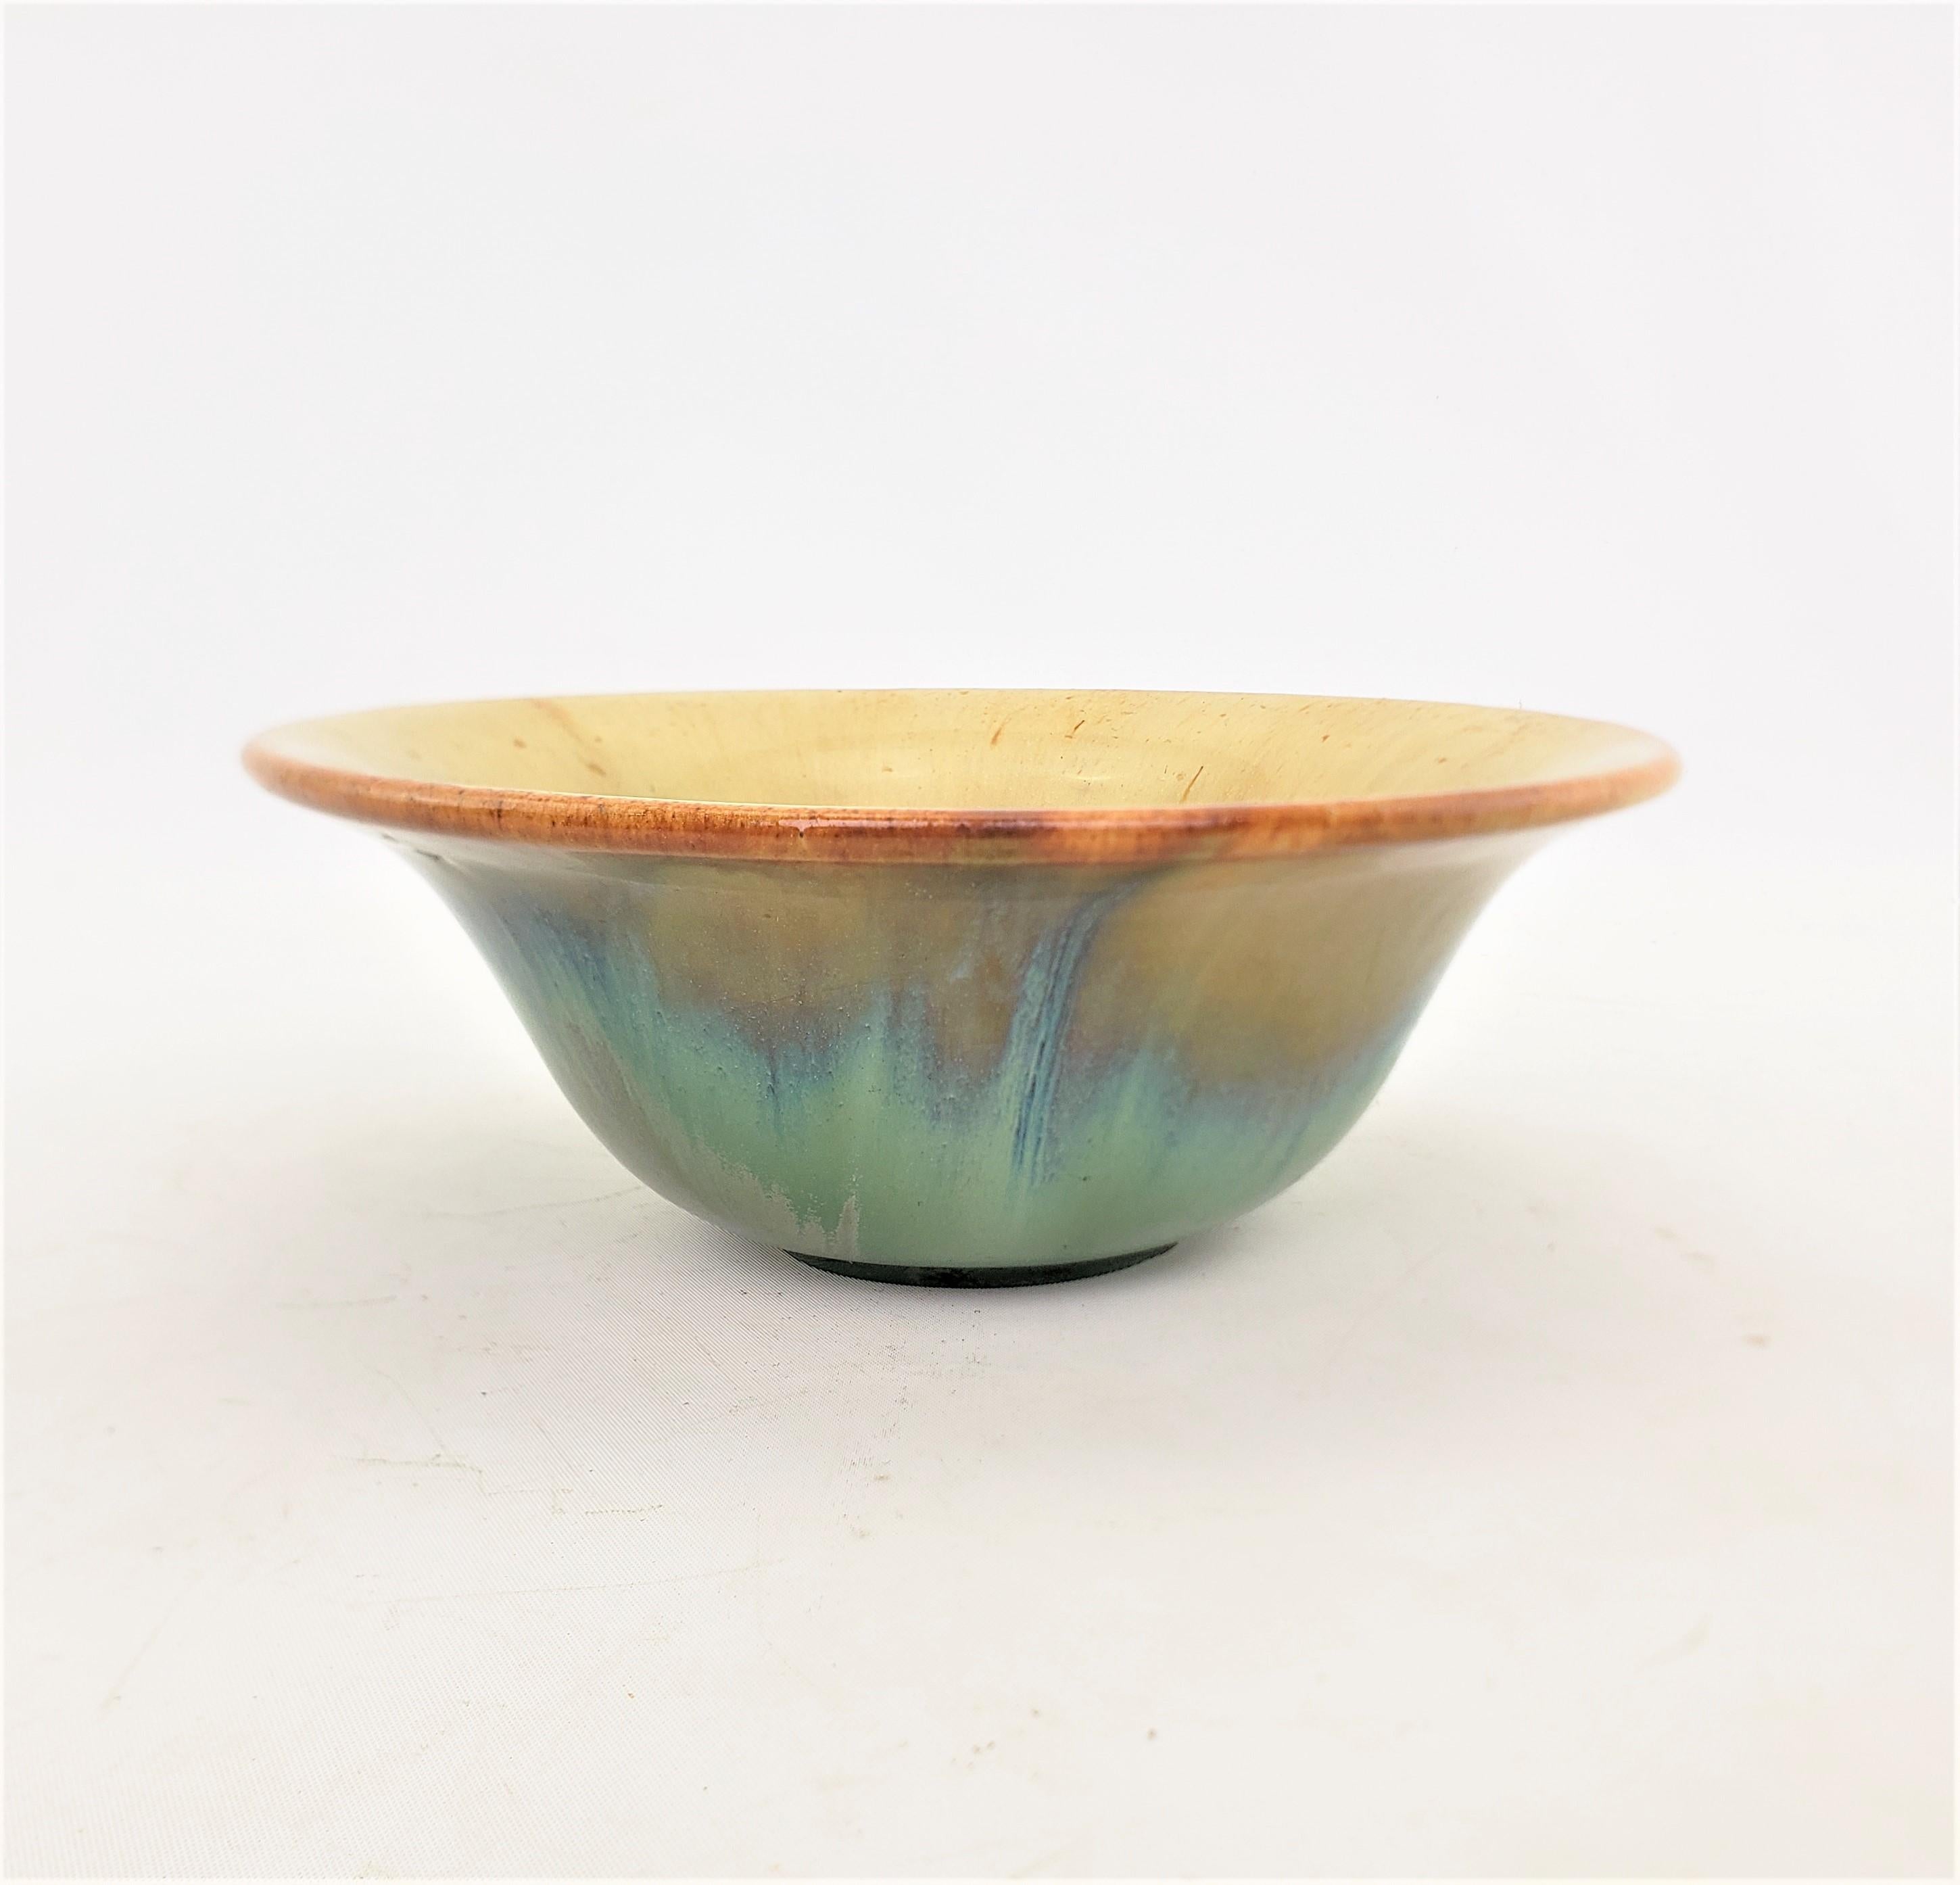 This antique art pottery bowl was made by the well known Fulper Pottery Company of the United States in approximately 1920 in their signature Arts and Crafts style. The bowl is composed of pottery with a slightly turned rim with a brown accent and